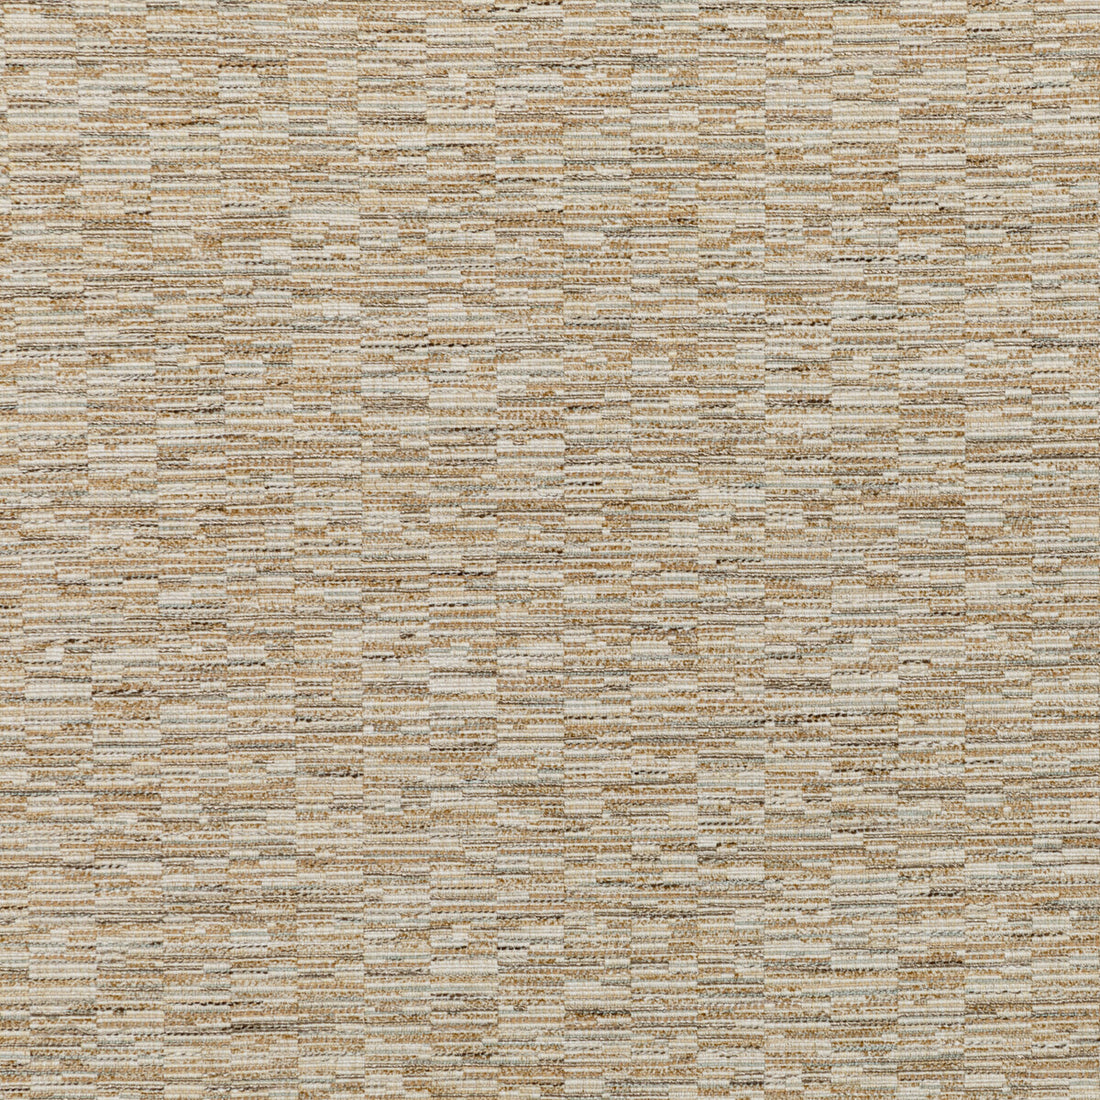 Noni Texture fabric in bronze color - pattern 36050.106.0 - by Kravet Couture in the Luxury Textures II collection